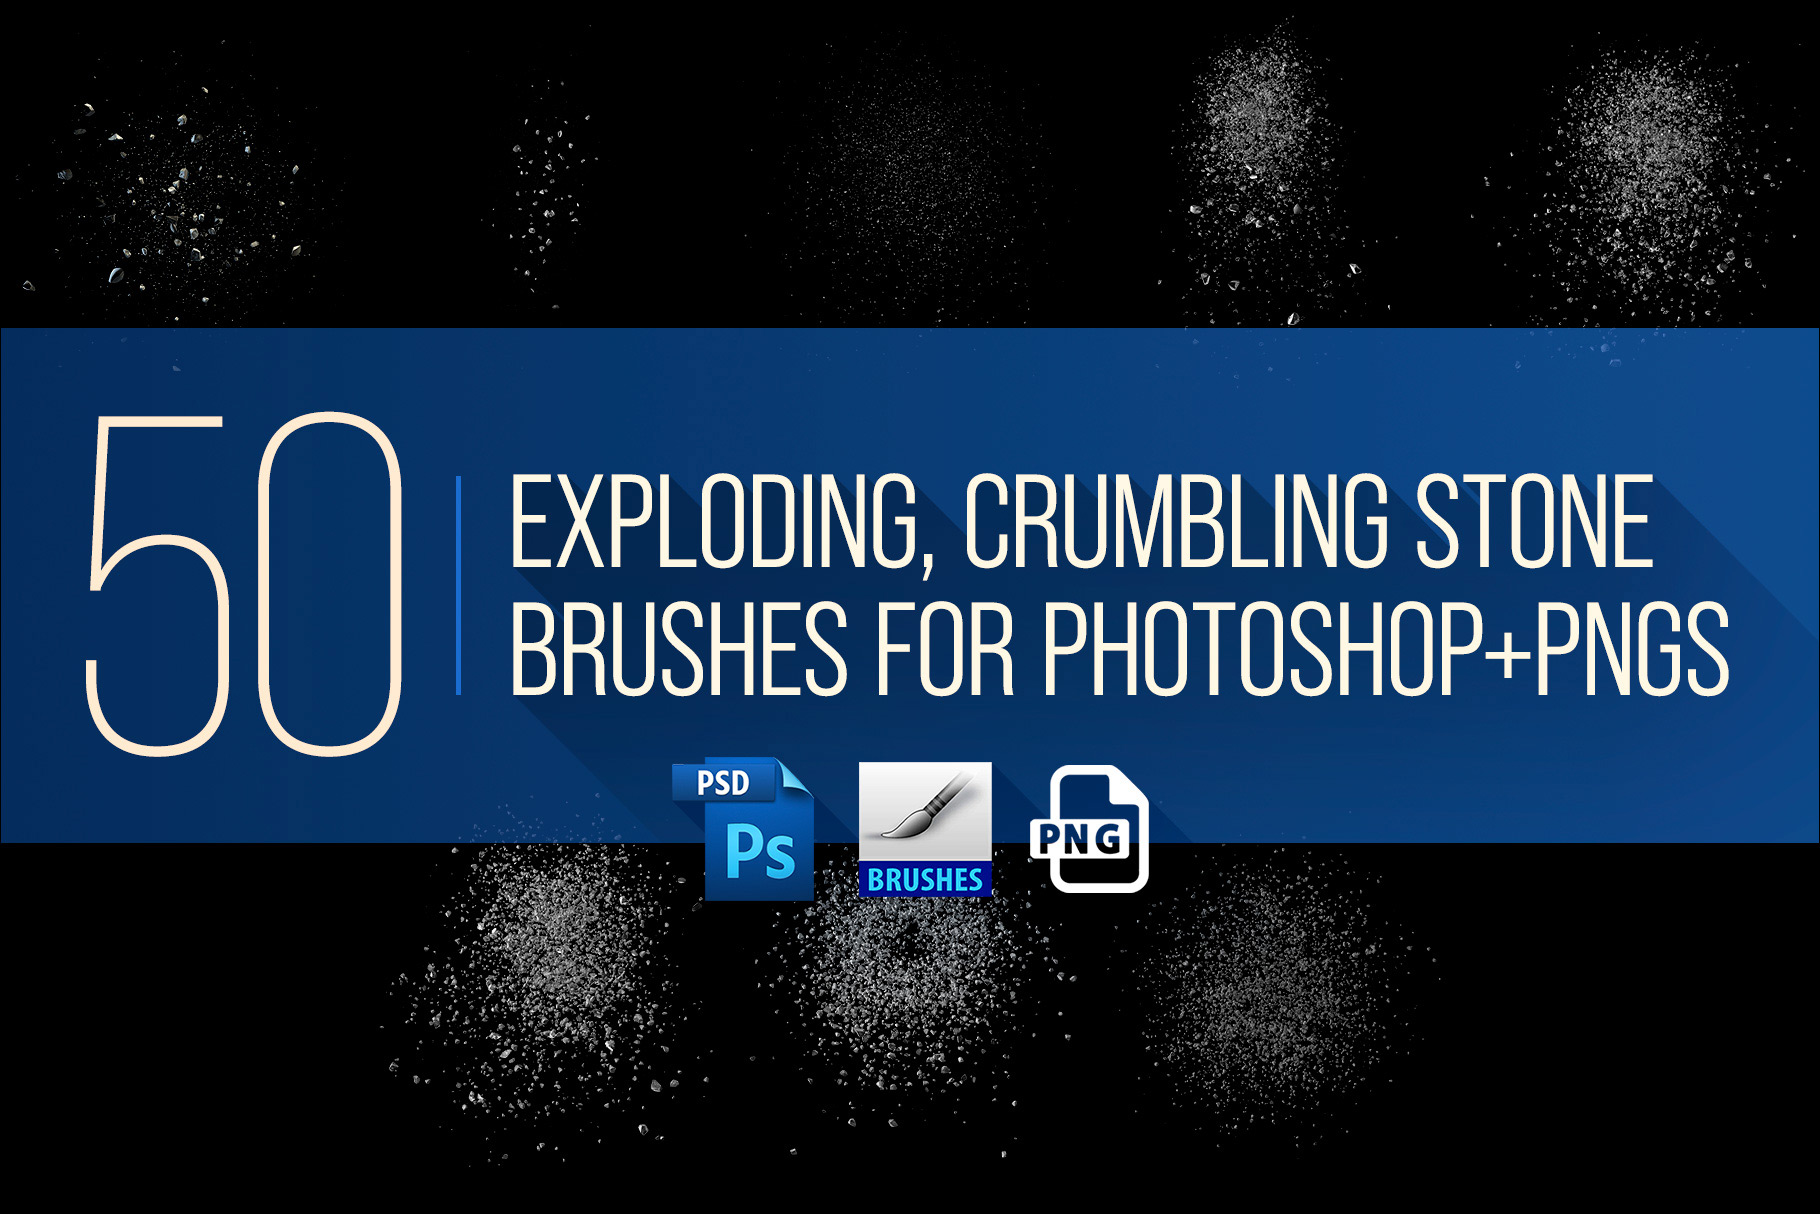 Crumbling Brushes Exploding Photoshop preview image.